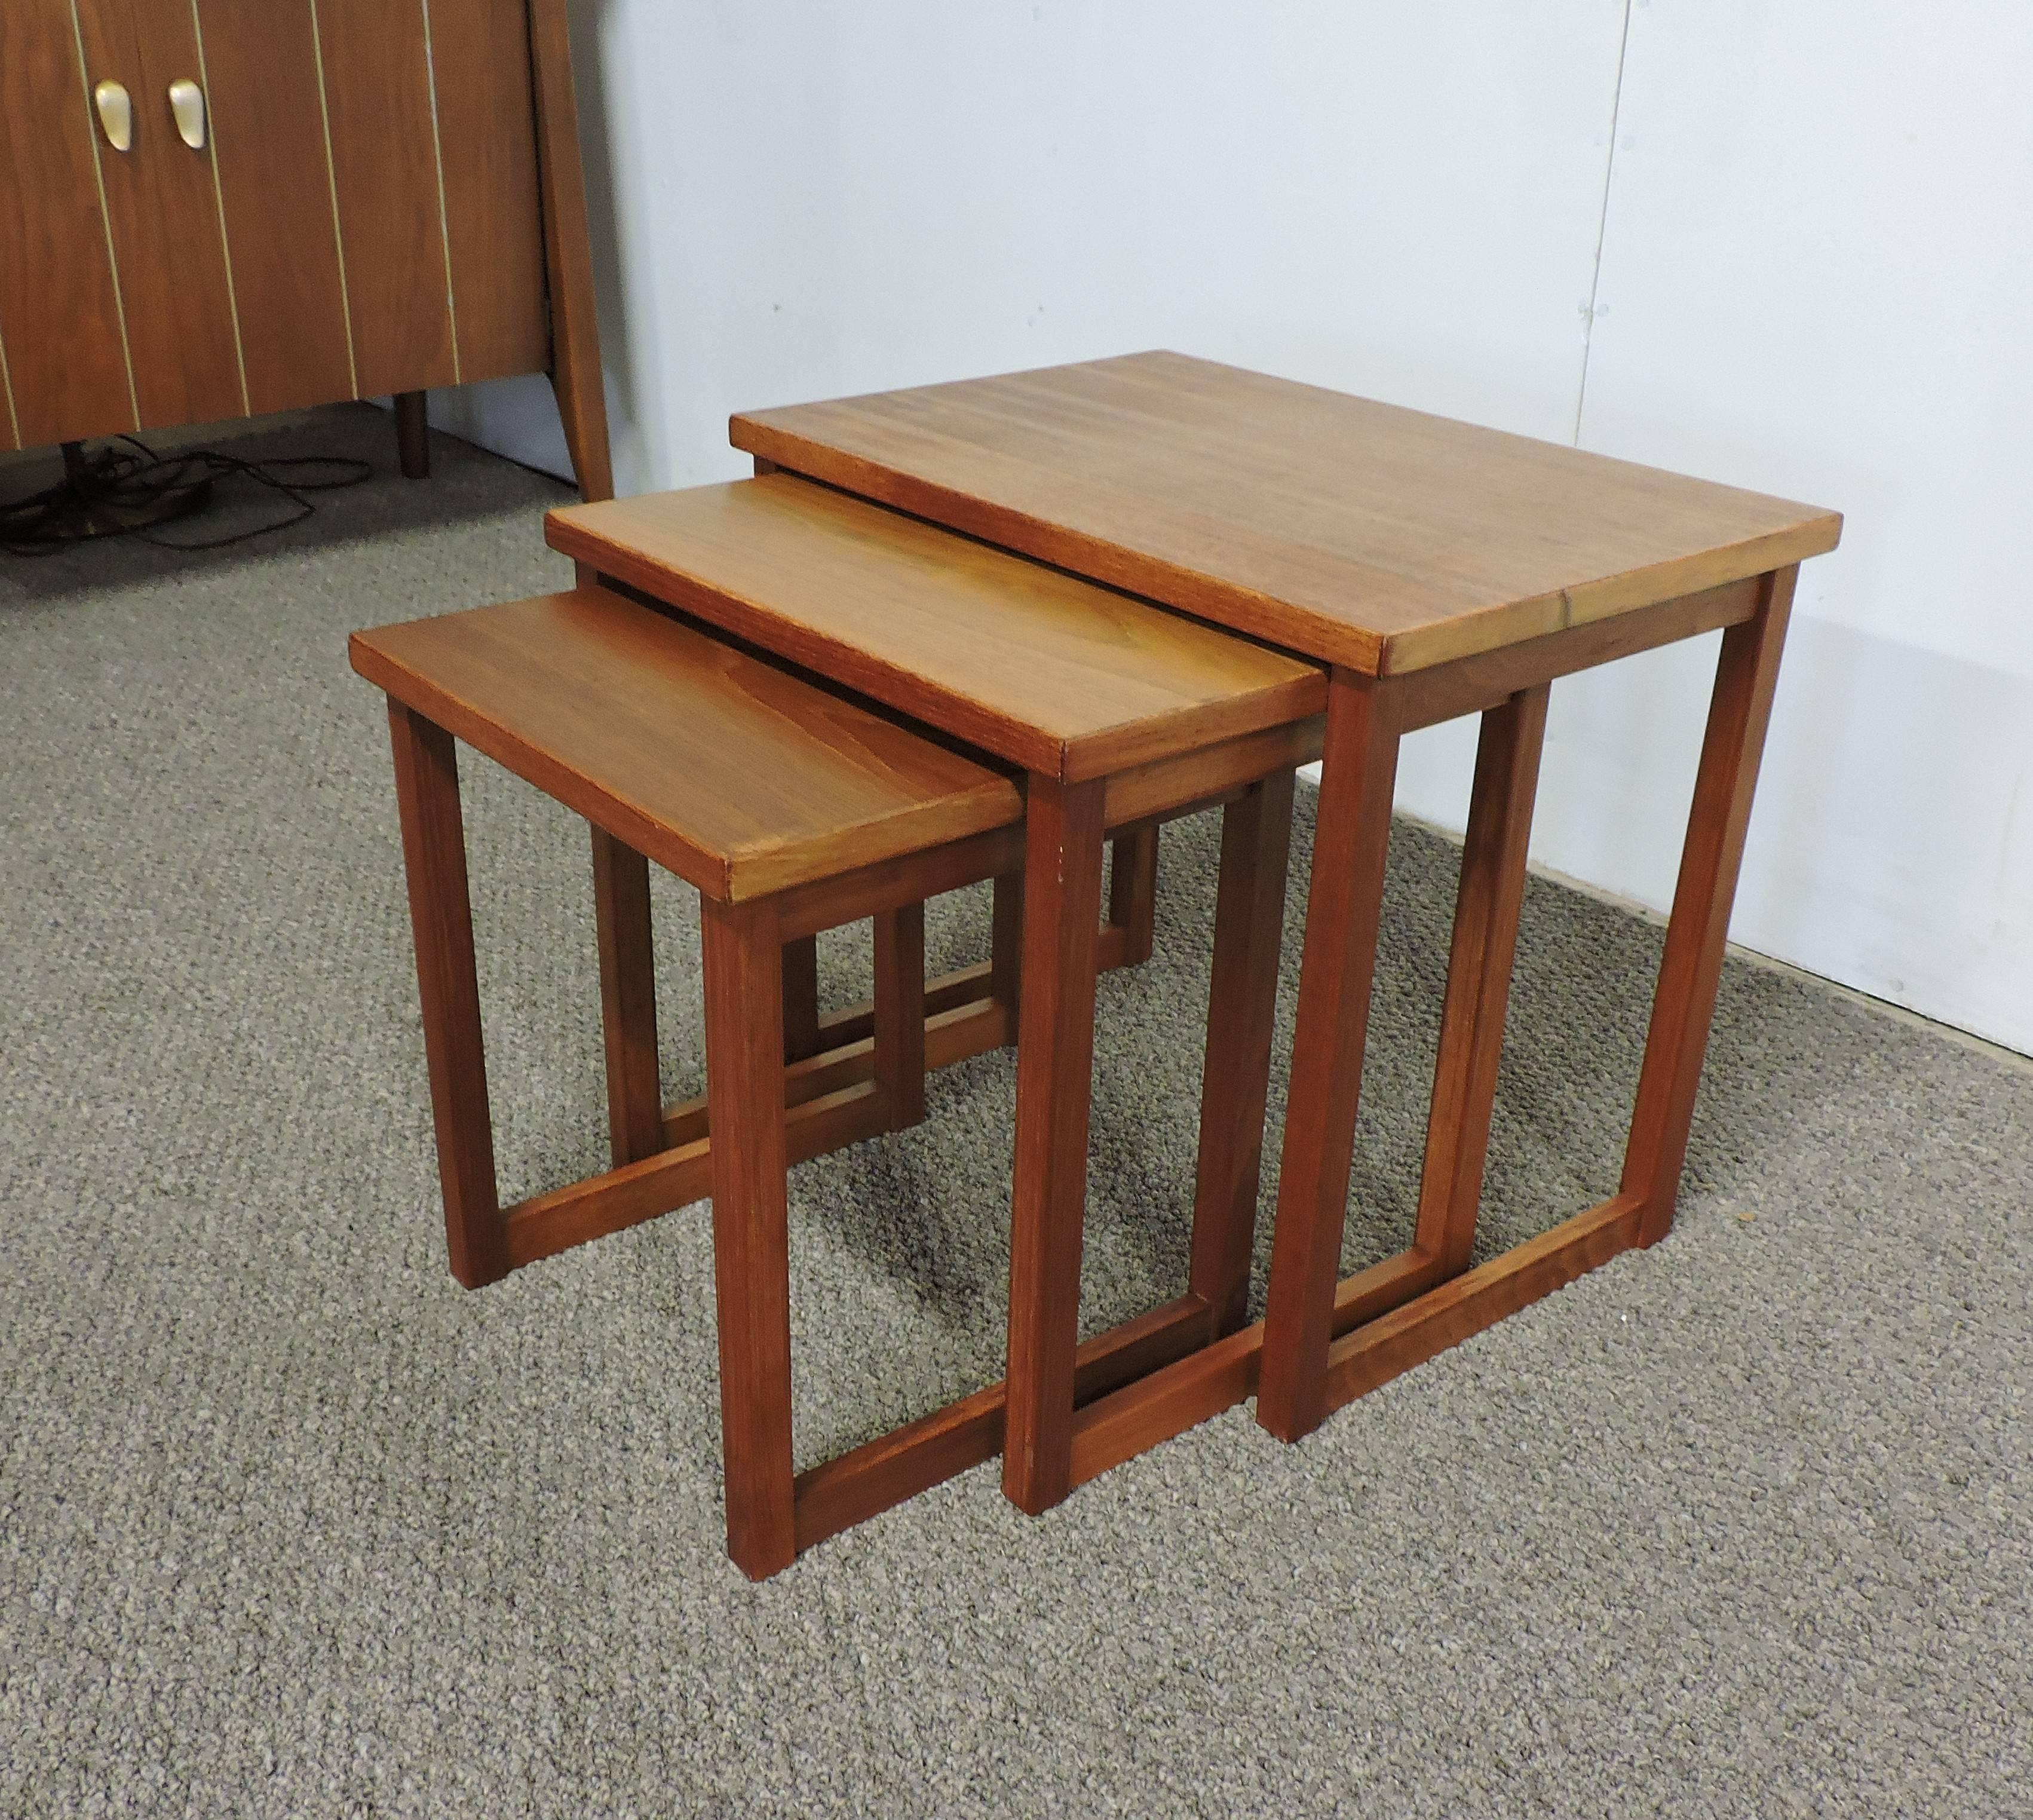 A set of three Danish teak nesting tables very similar to ones designed by Svante Skogh. These versatile tables have solid teak legs and are great for small spaces. Stamped made in Denmark, the dimensions are for the largest table.